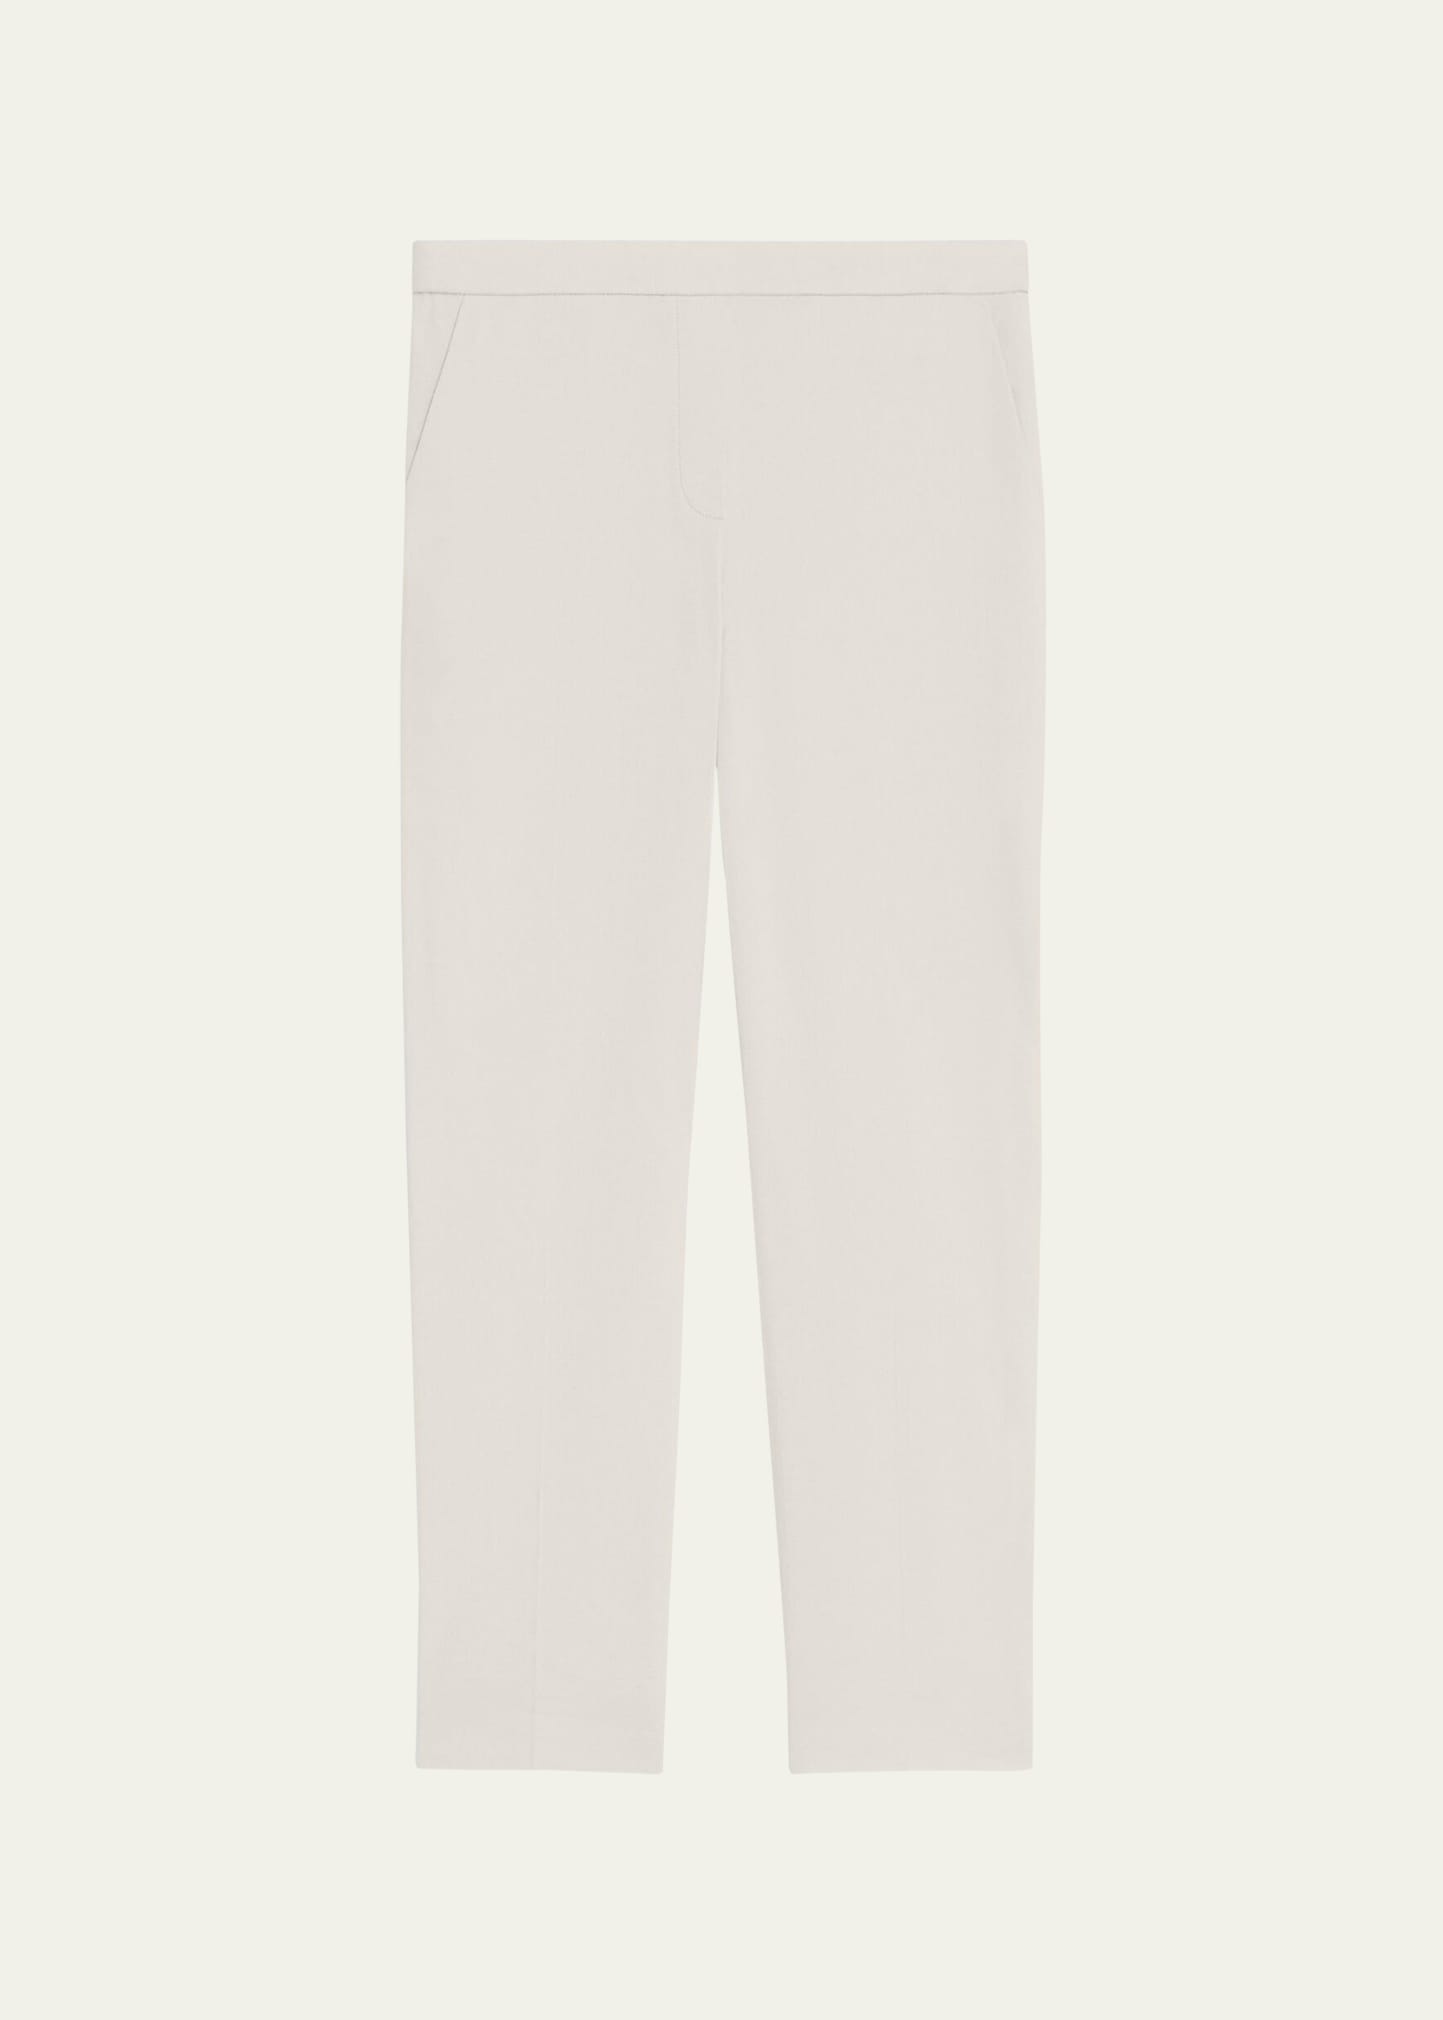 THEORY TREECA GOOD LINEN CROPPED PULL-ON ANKLE PANTS